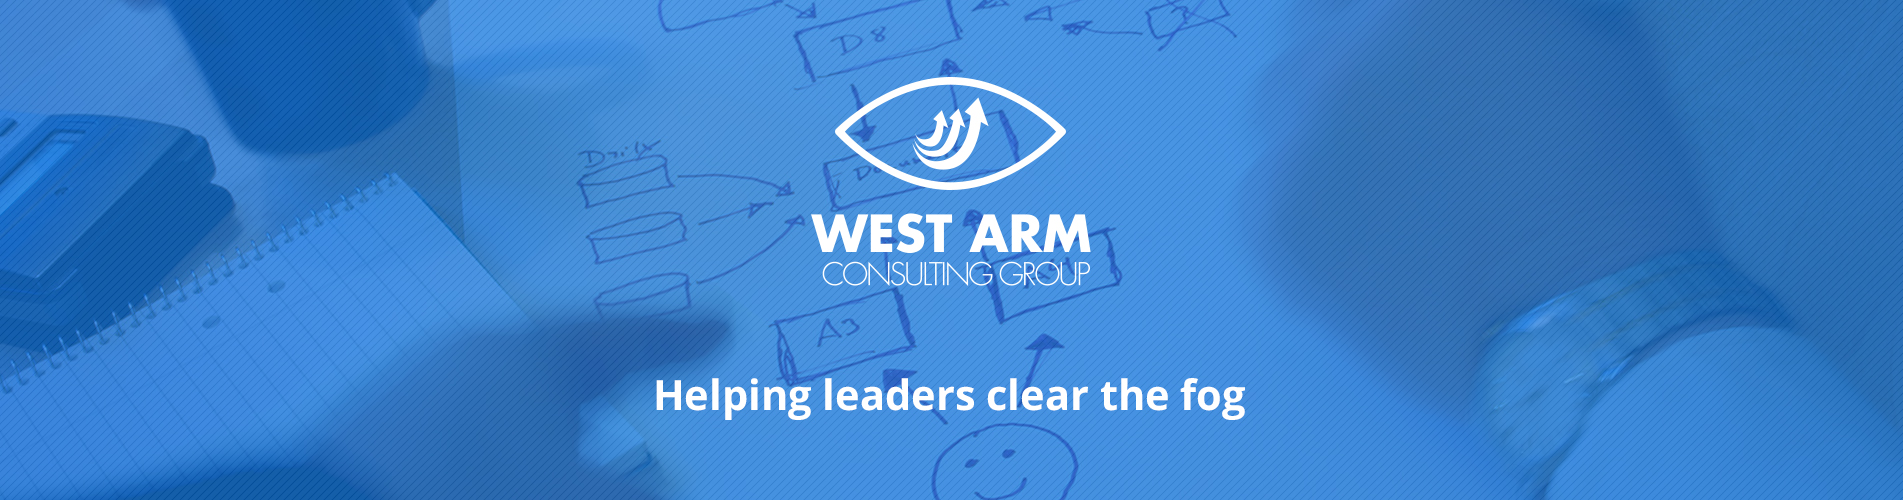 West Arem Consulting Group | Helping leaders clear the fog